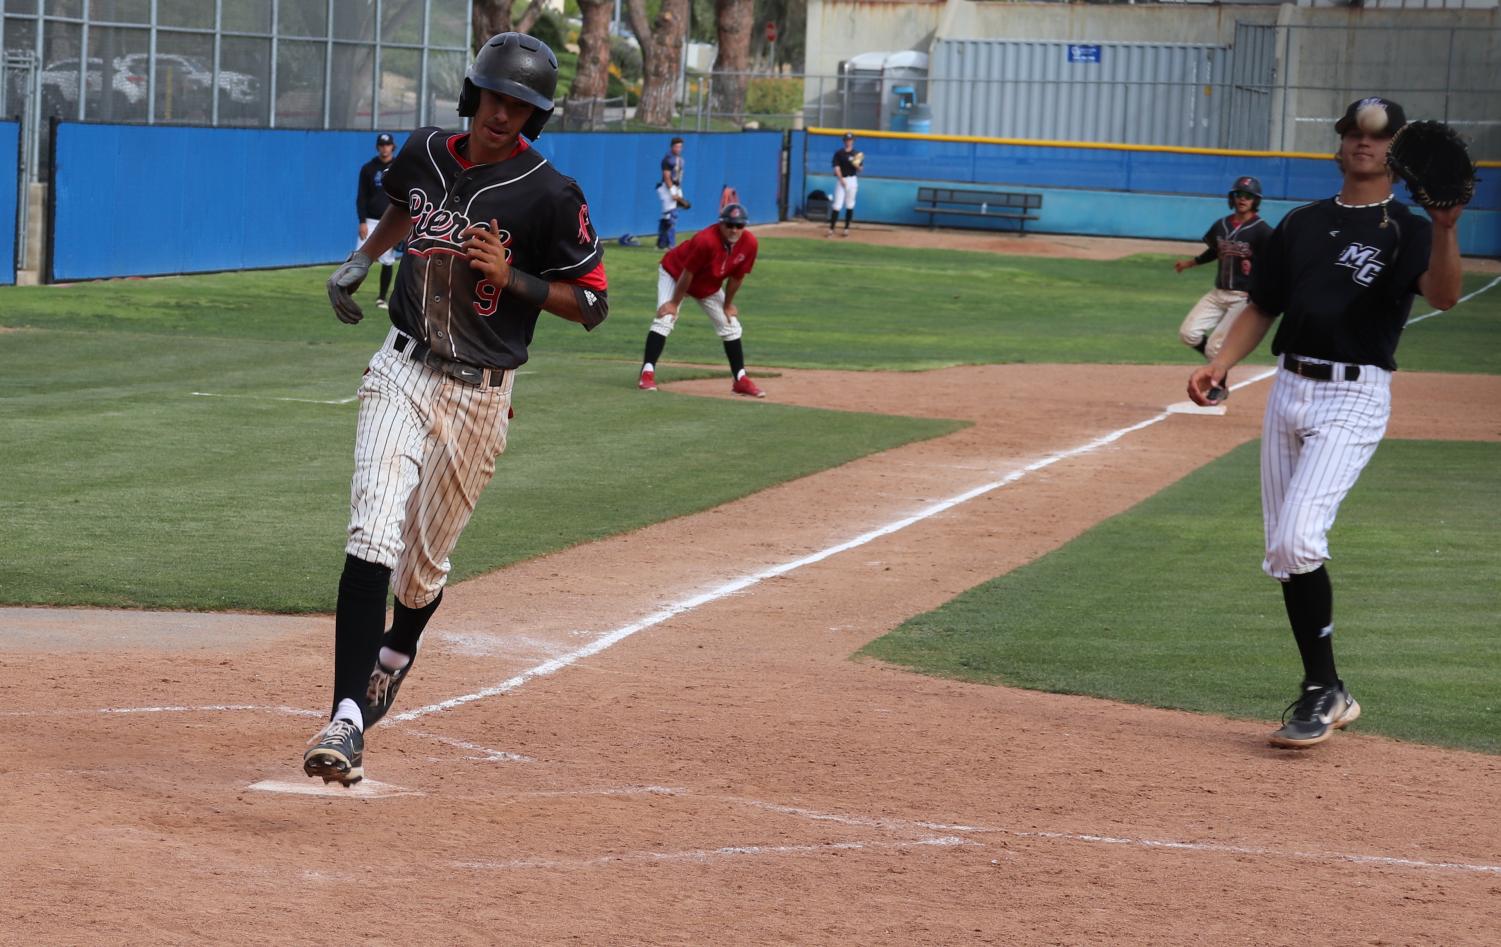 Pierce infielder Ryan Barry scores on a wild pitch in the 9th inning vs the Raiders on April 21, 2022, at Moorpark College.